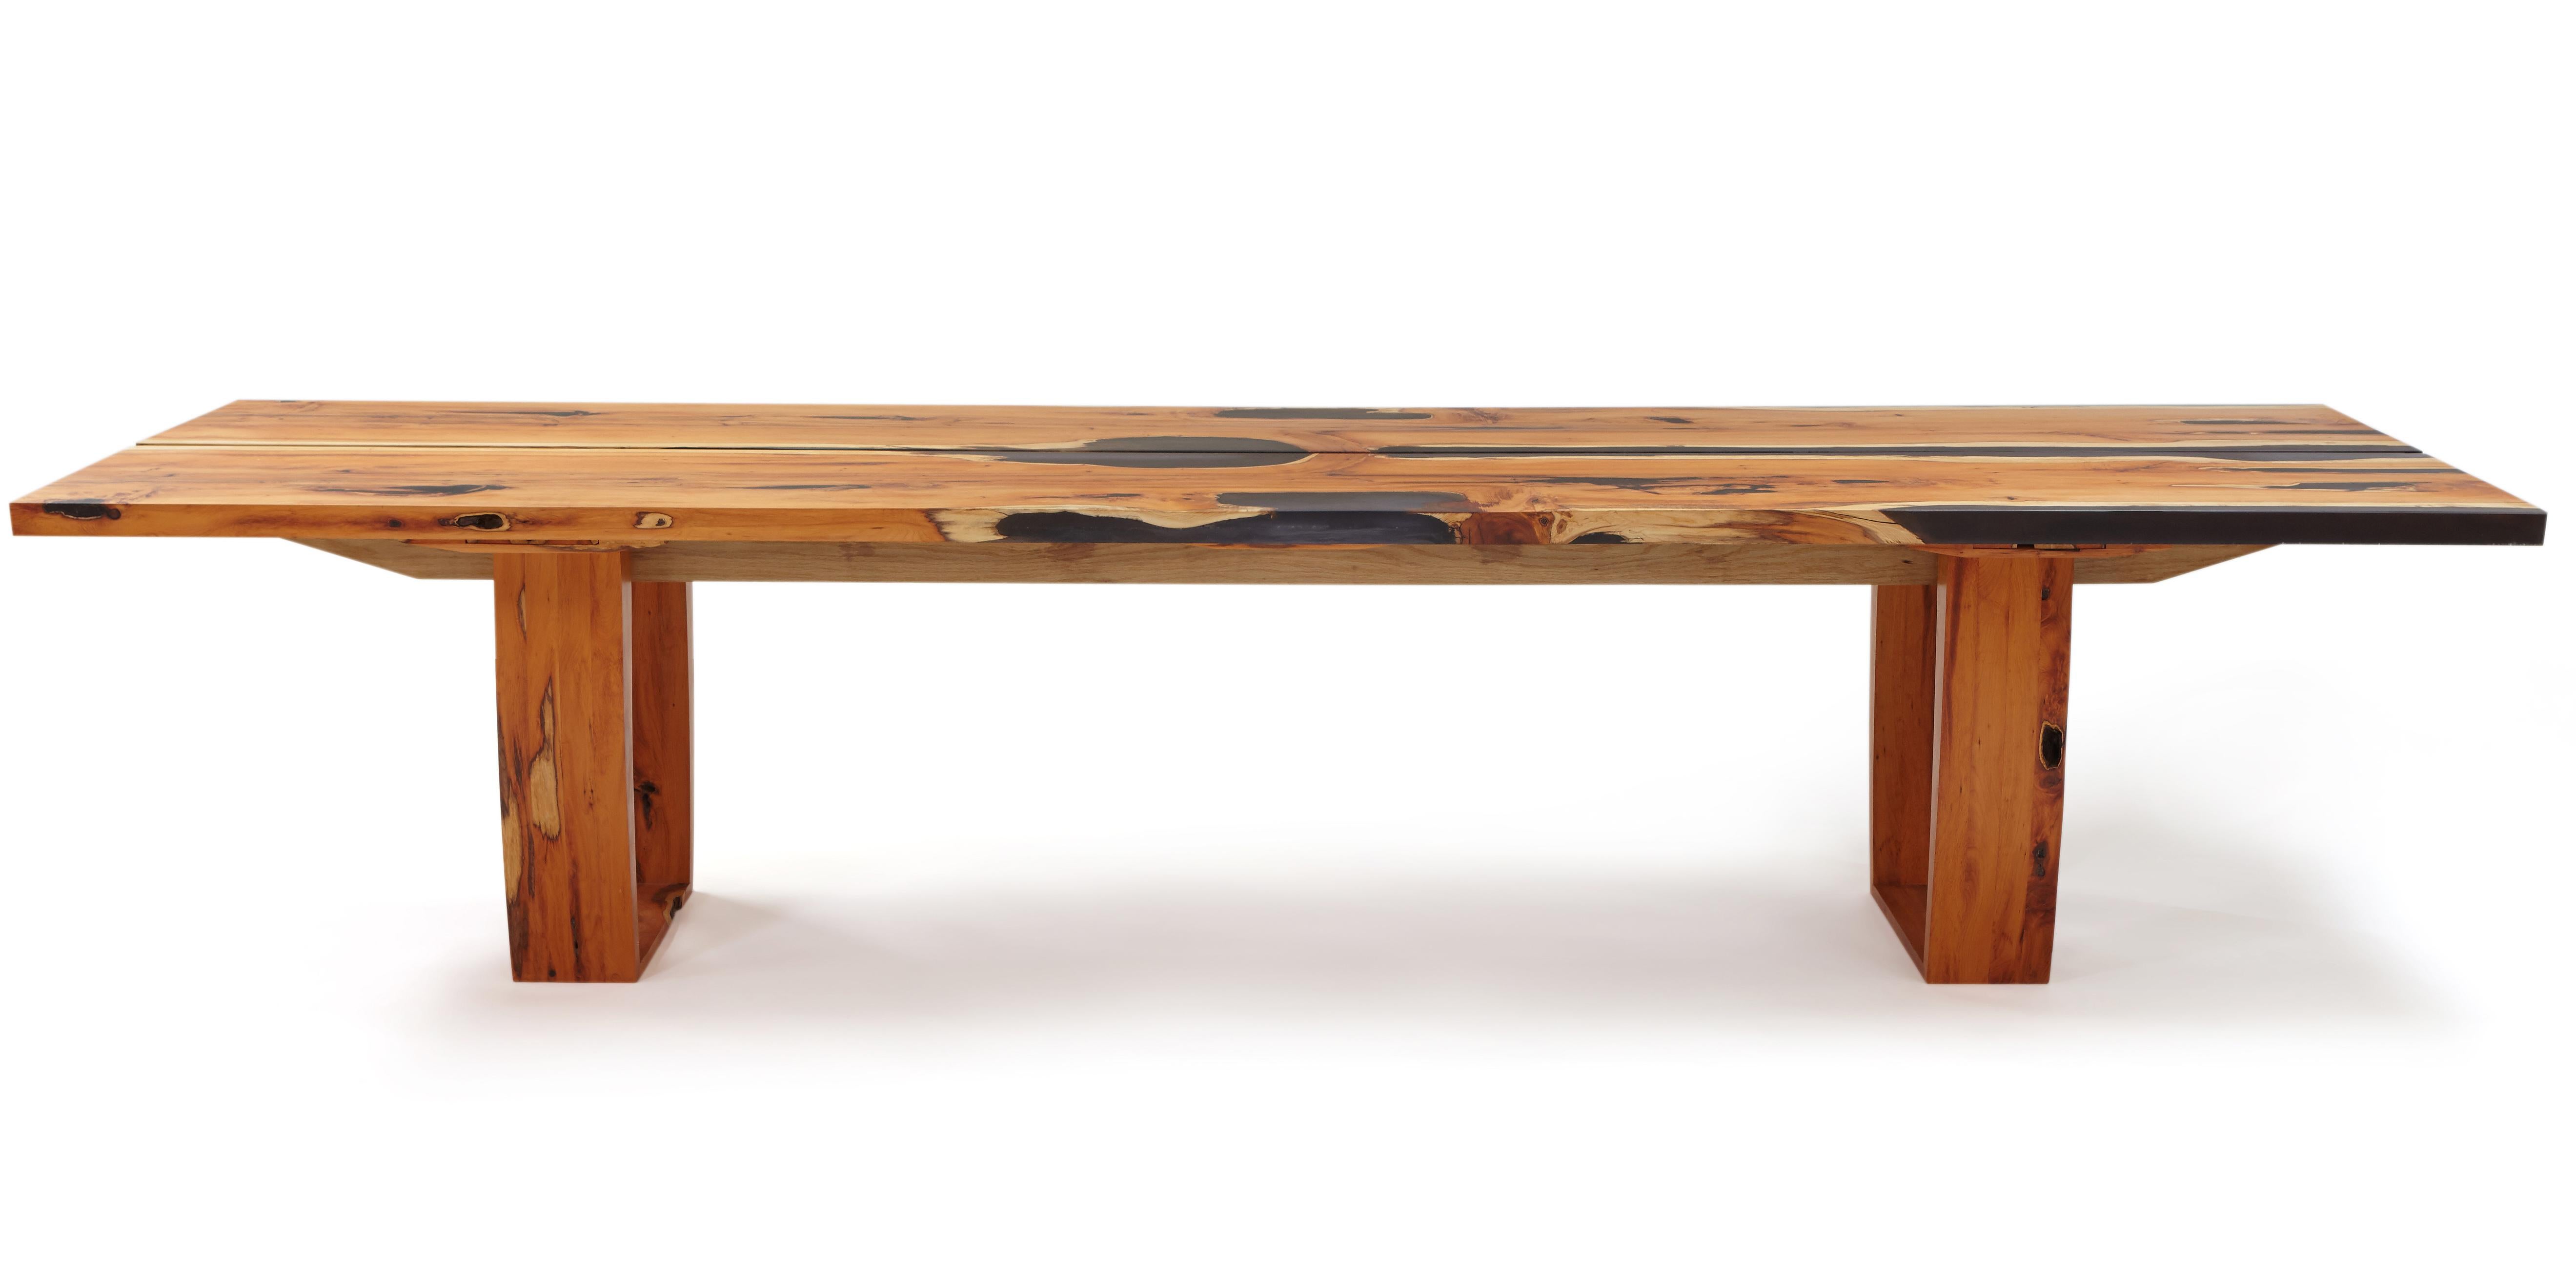 English Yew Table: Unique.  Made from two slabs of mirror image /book matched yew with ebony tinted clear resin along the live edge. The support spines are in solid oak. The table comes apart for moving. 
The tabletop can also be altered to remove